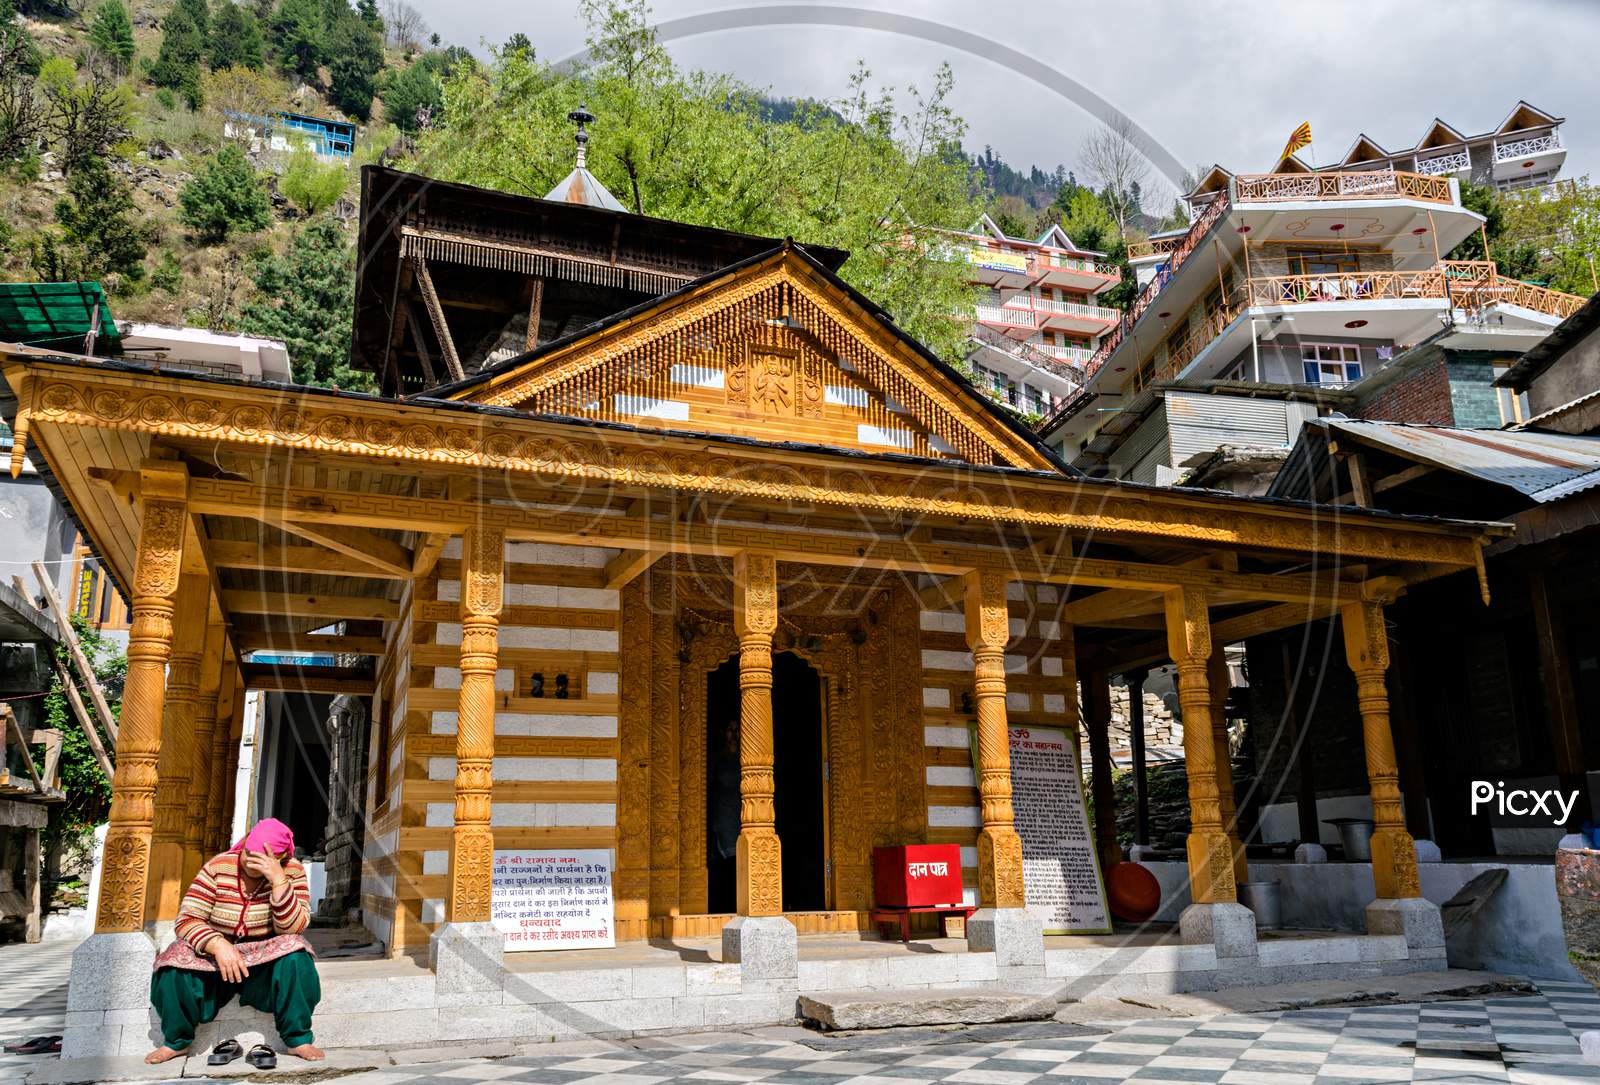 A Lady Sitting In Sunlight In Front Of Vashistha Temple Famous For Hot Water Springs In Manali, Himachal Pradesh, India.